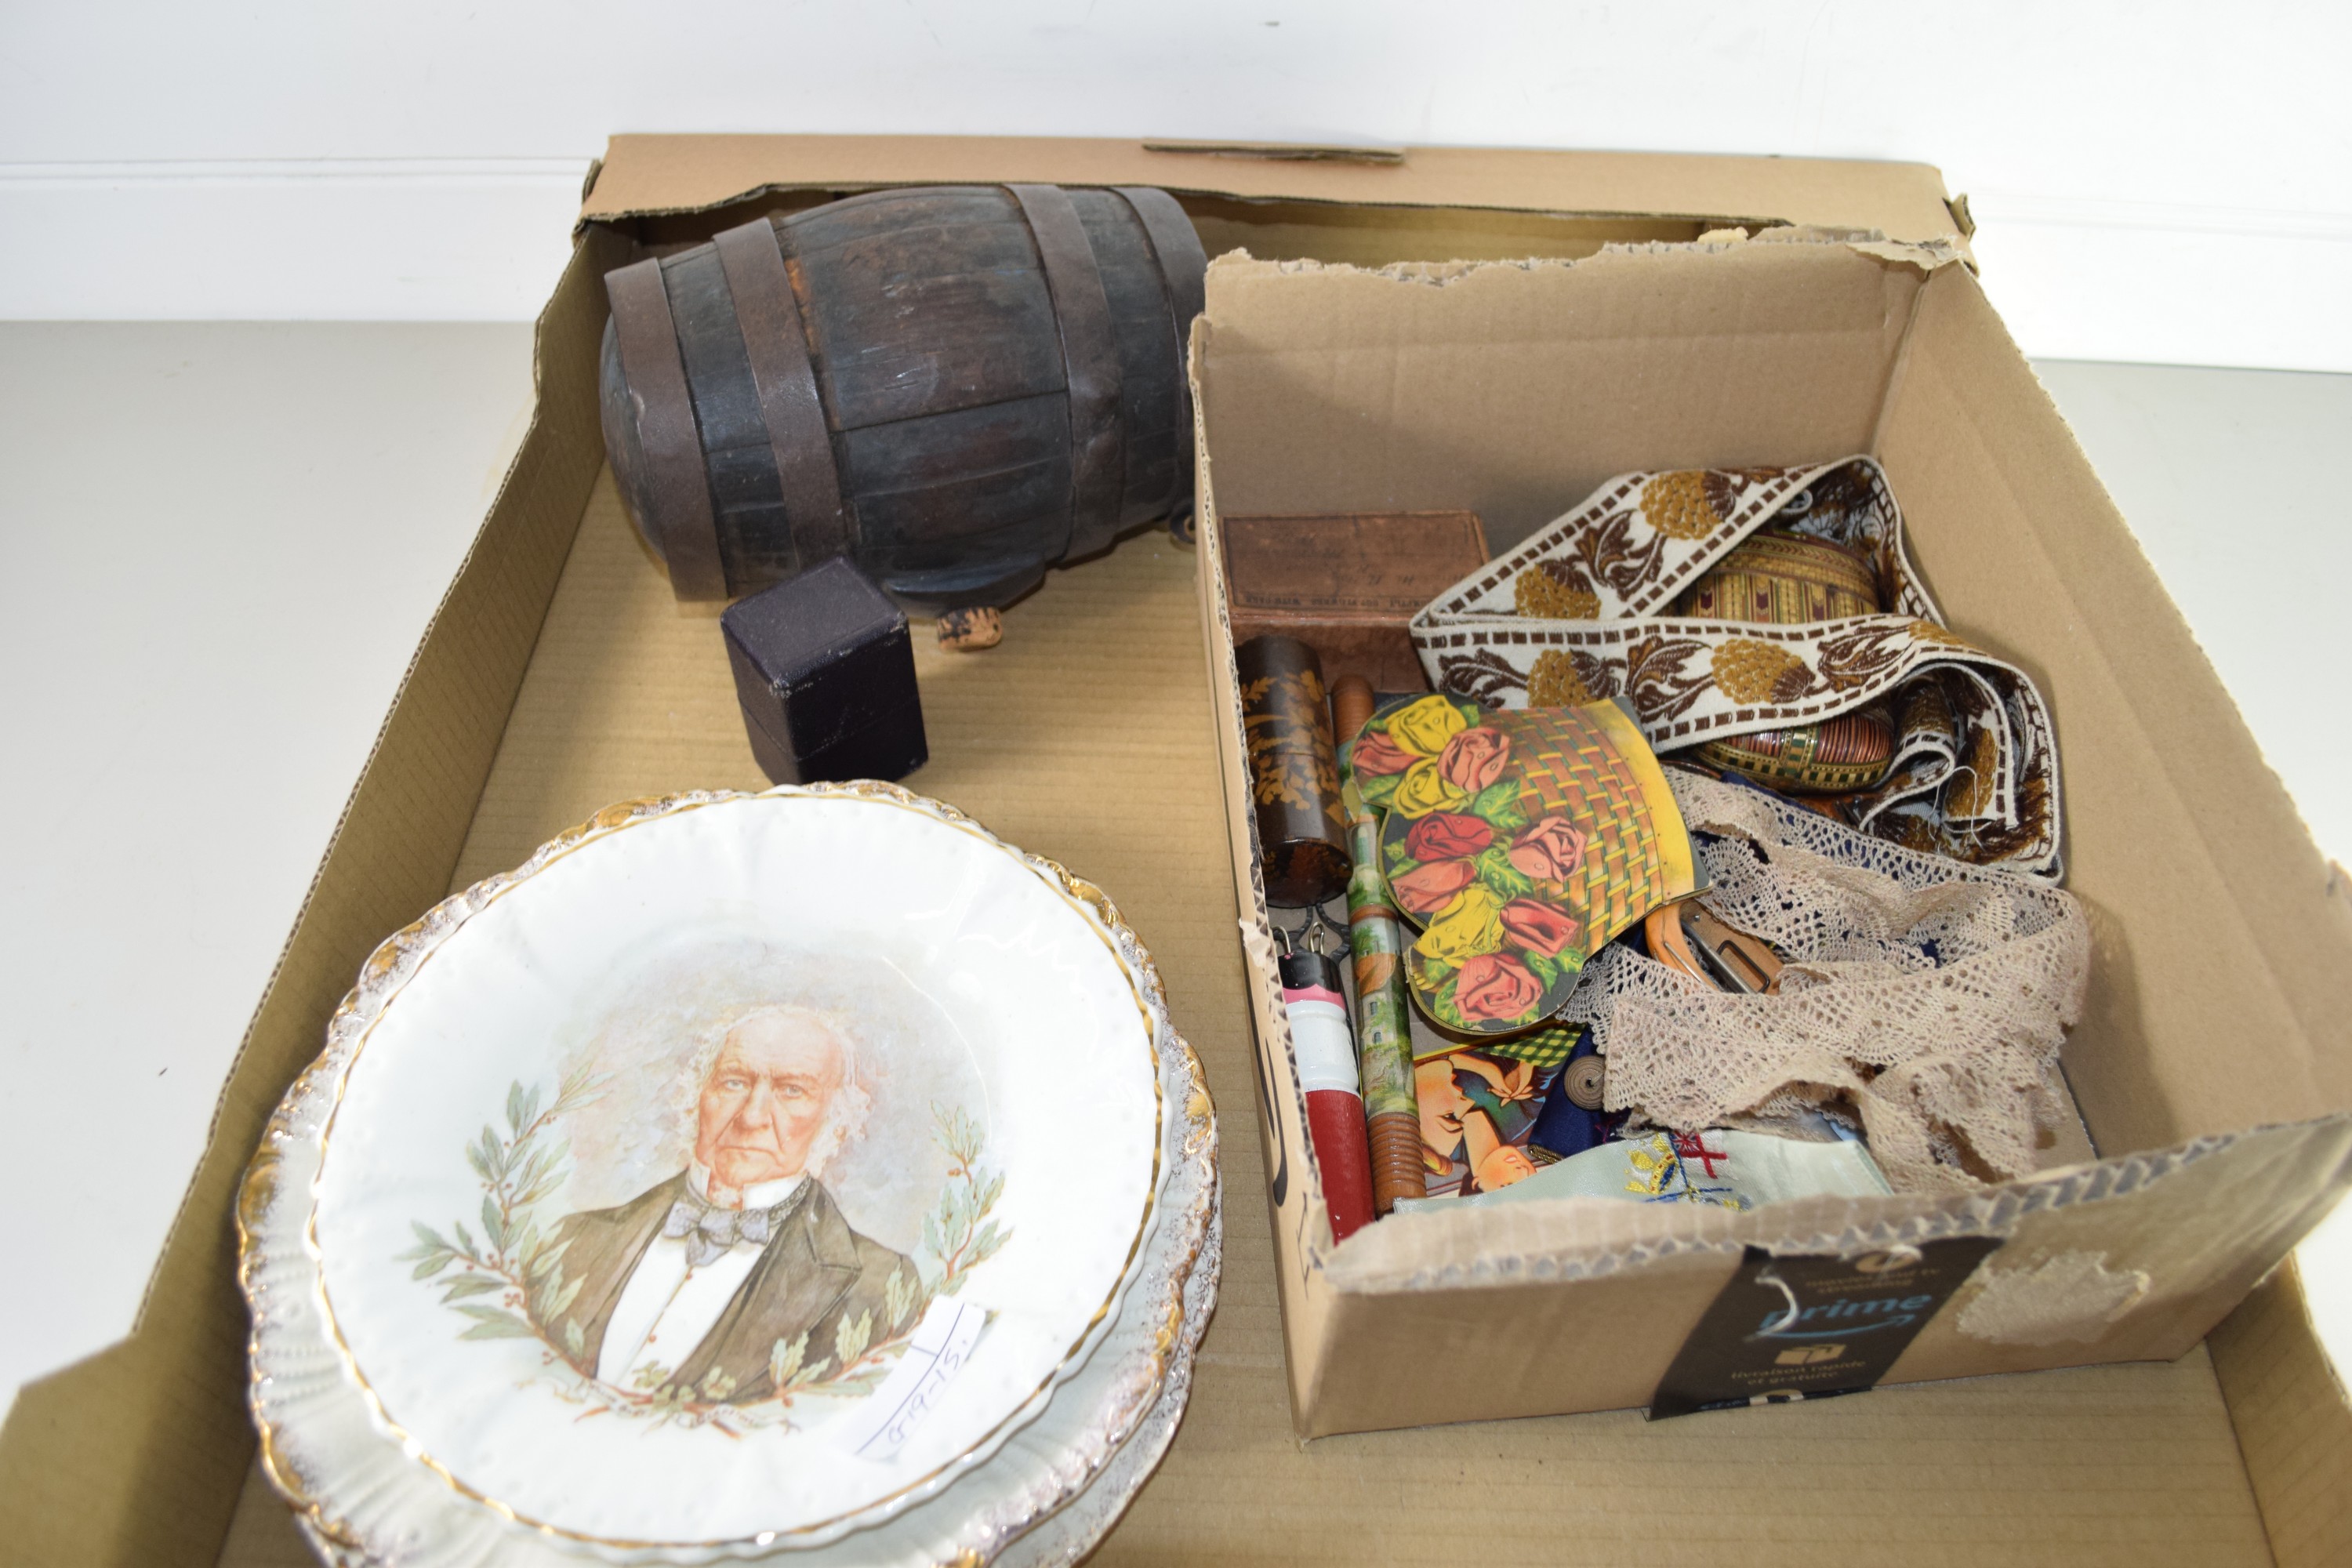 TRAY CONTAINING CERAMIC PLATES, SOME WITH COMMEMORATING WILLIAM GLADSTONE, SMALL BOX WITH VARIOUS